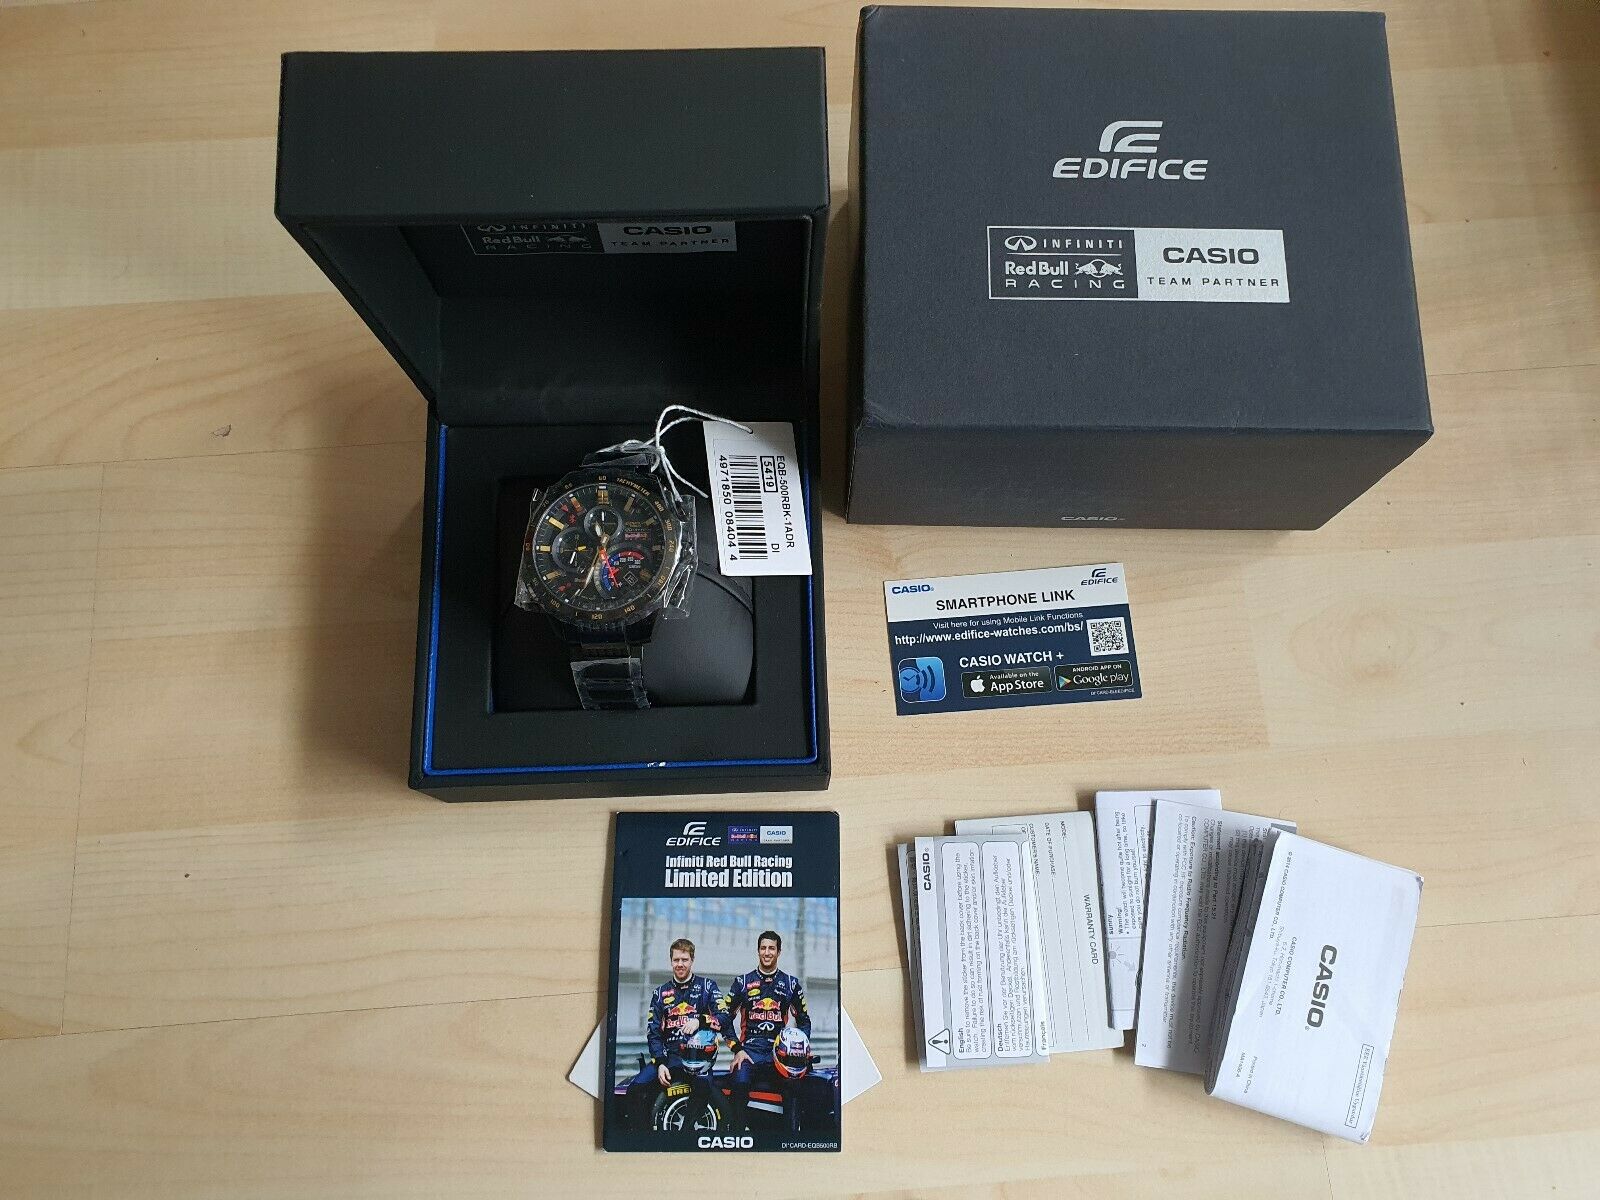 Casio Edifice EQB-500 RBK 1AER Infinity Red Bull Racing Limited